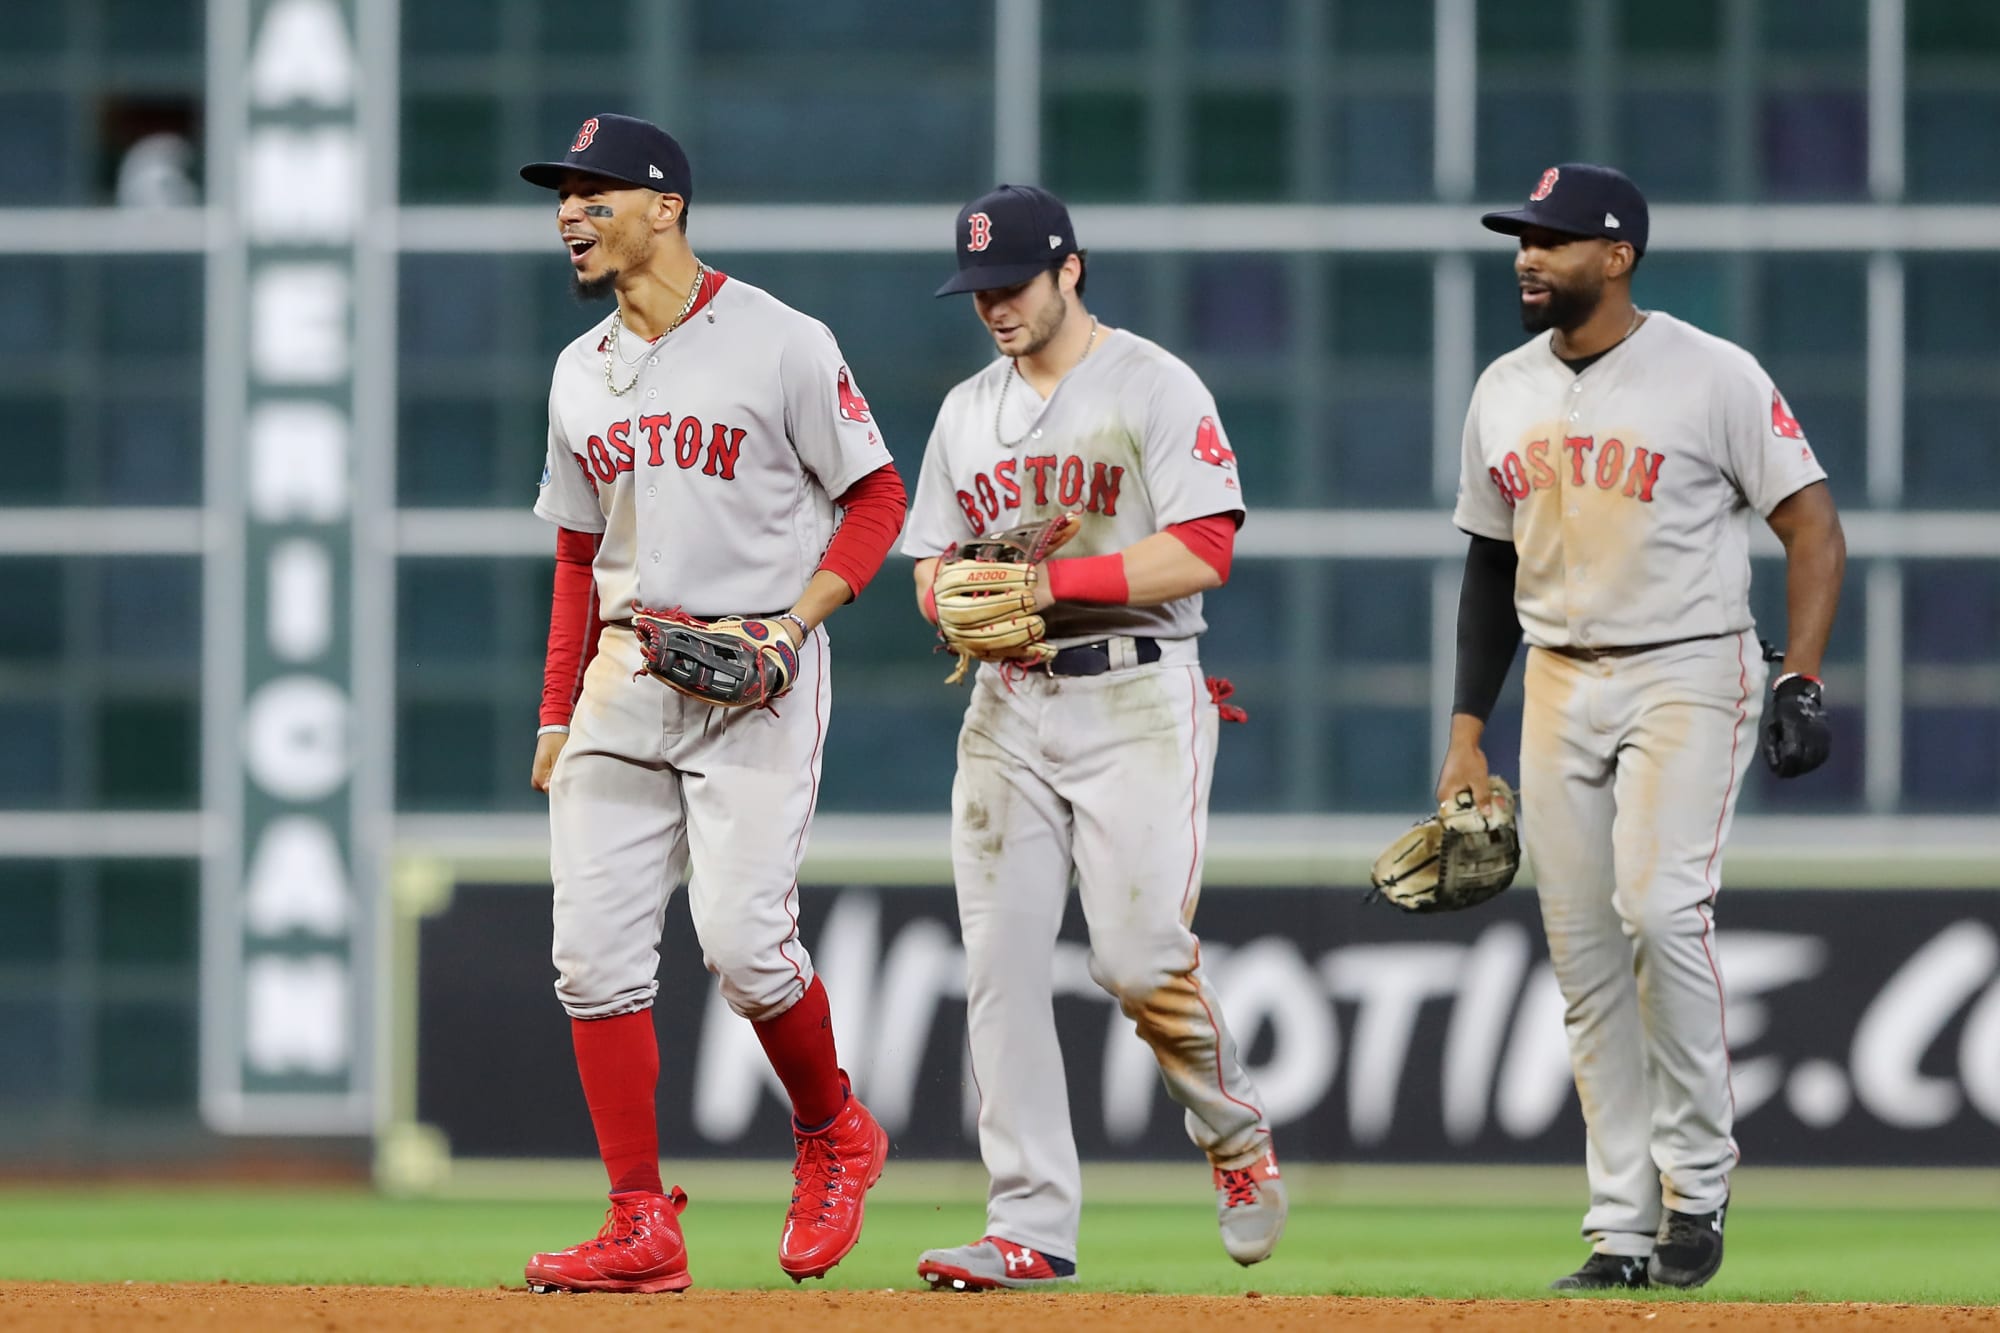 The Red Sox can shift the standings with Mariners coming to town